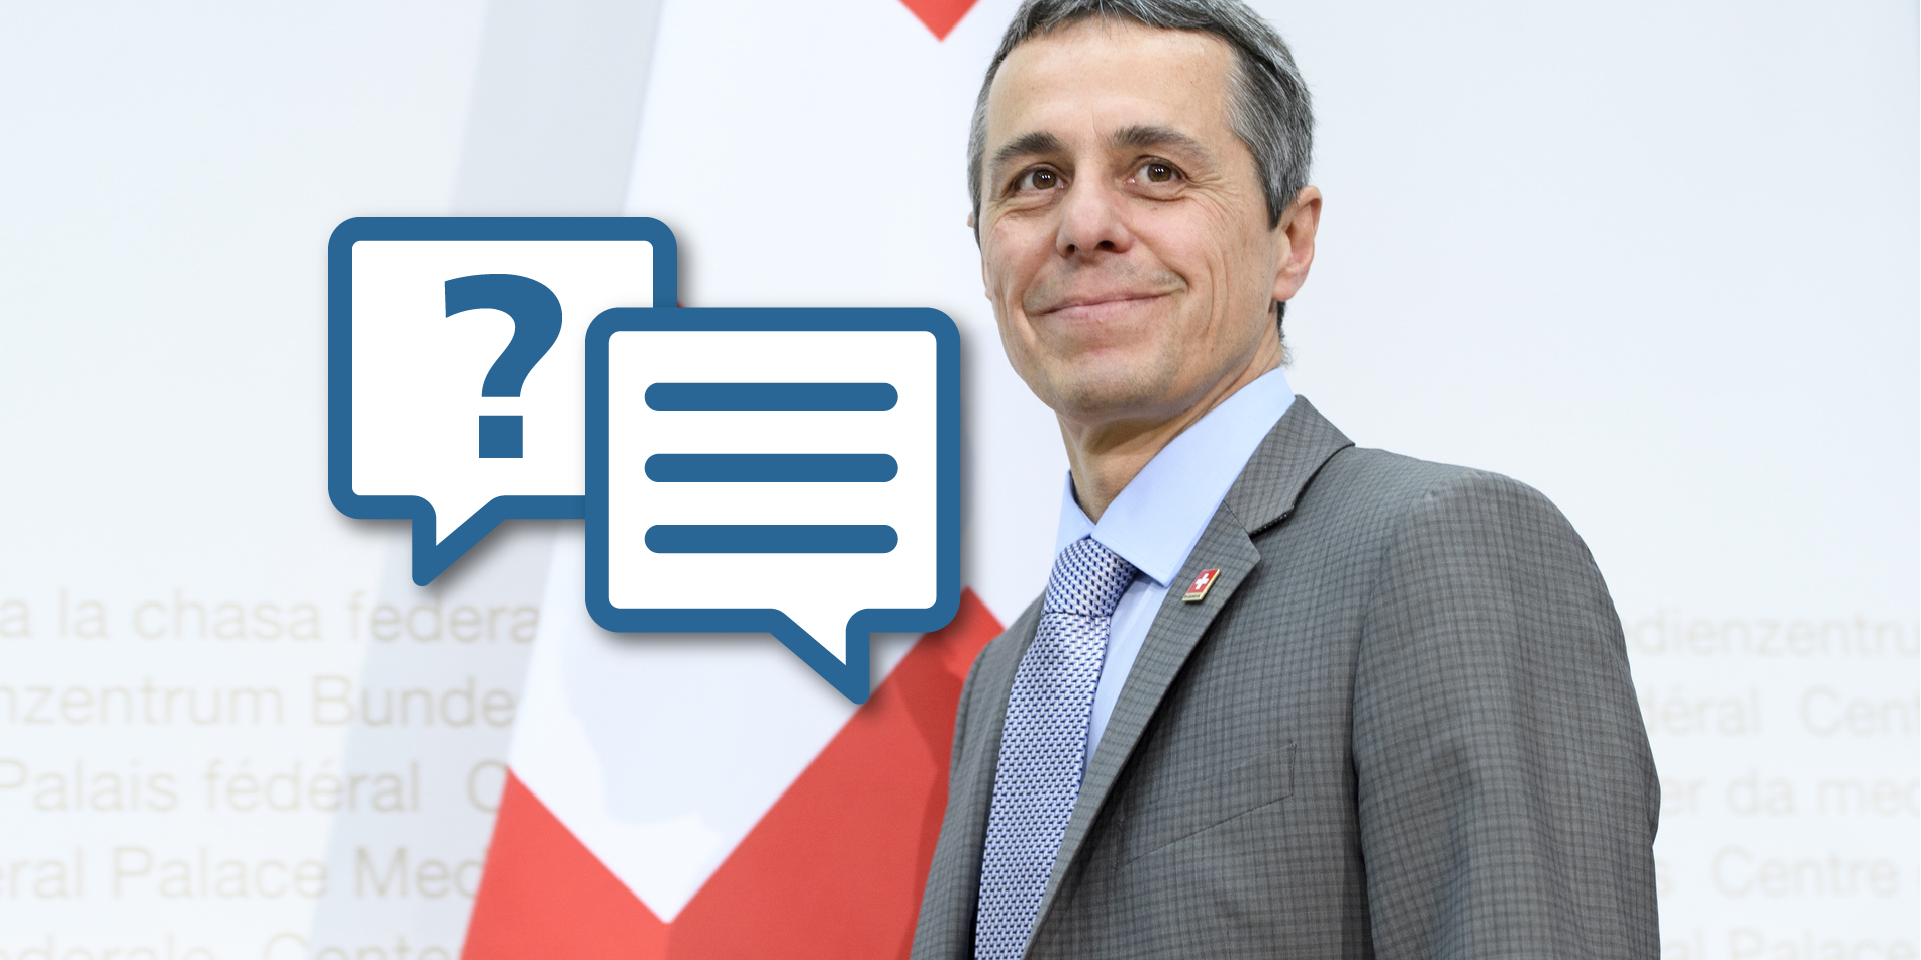 A portrait picture of Federal Councillor Cassis with a graphic motif referring to an interview.